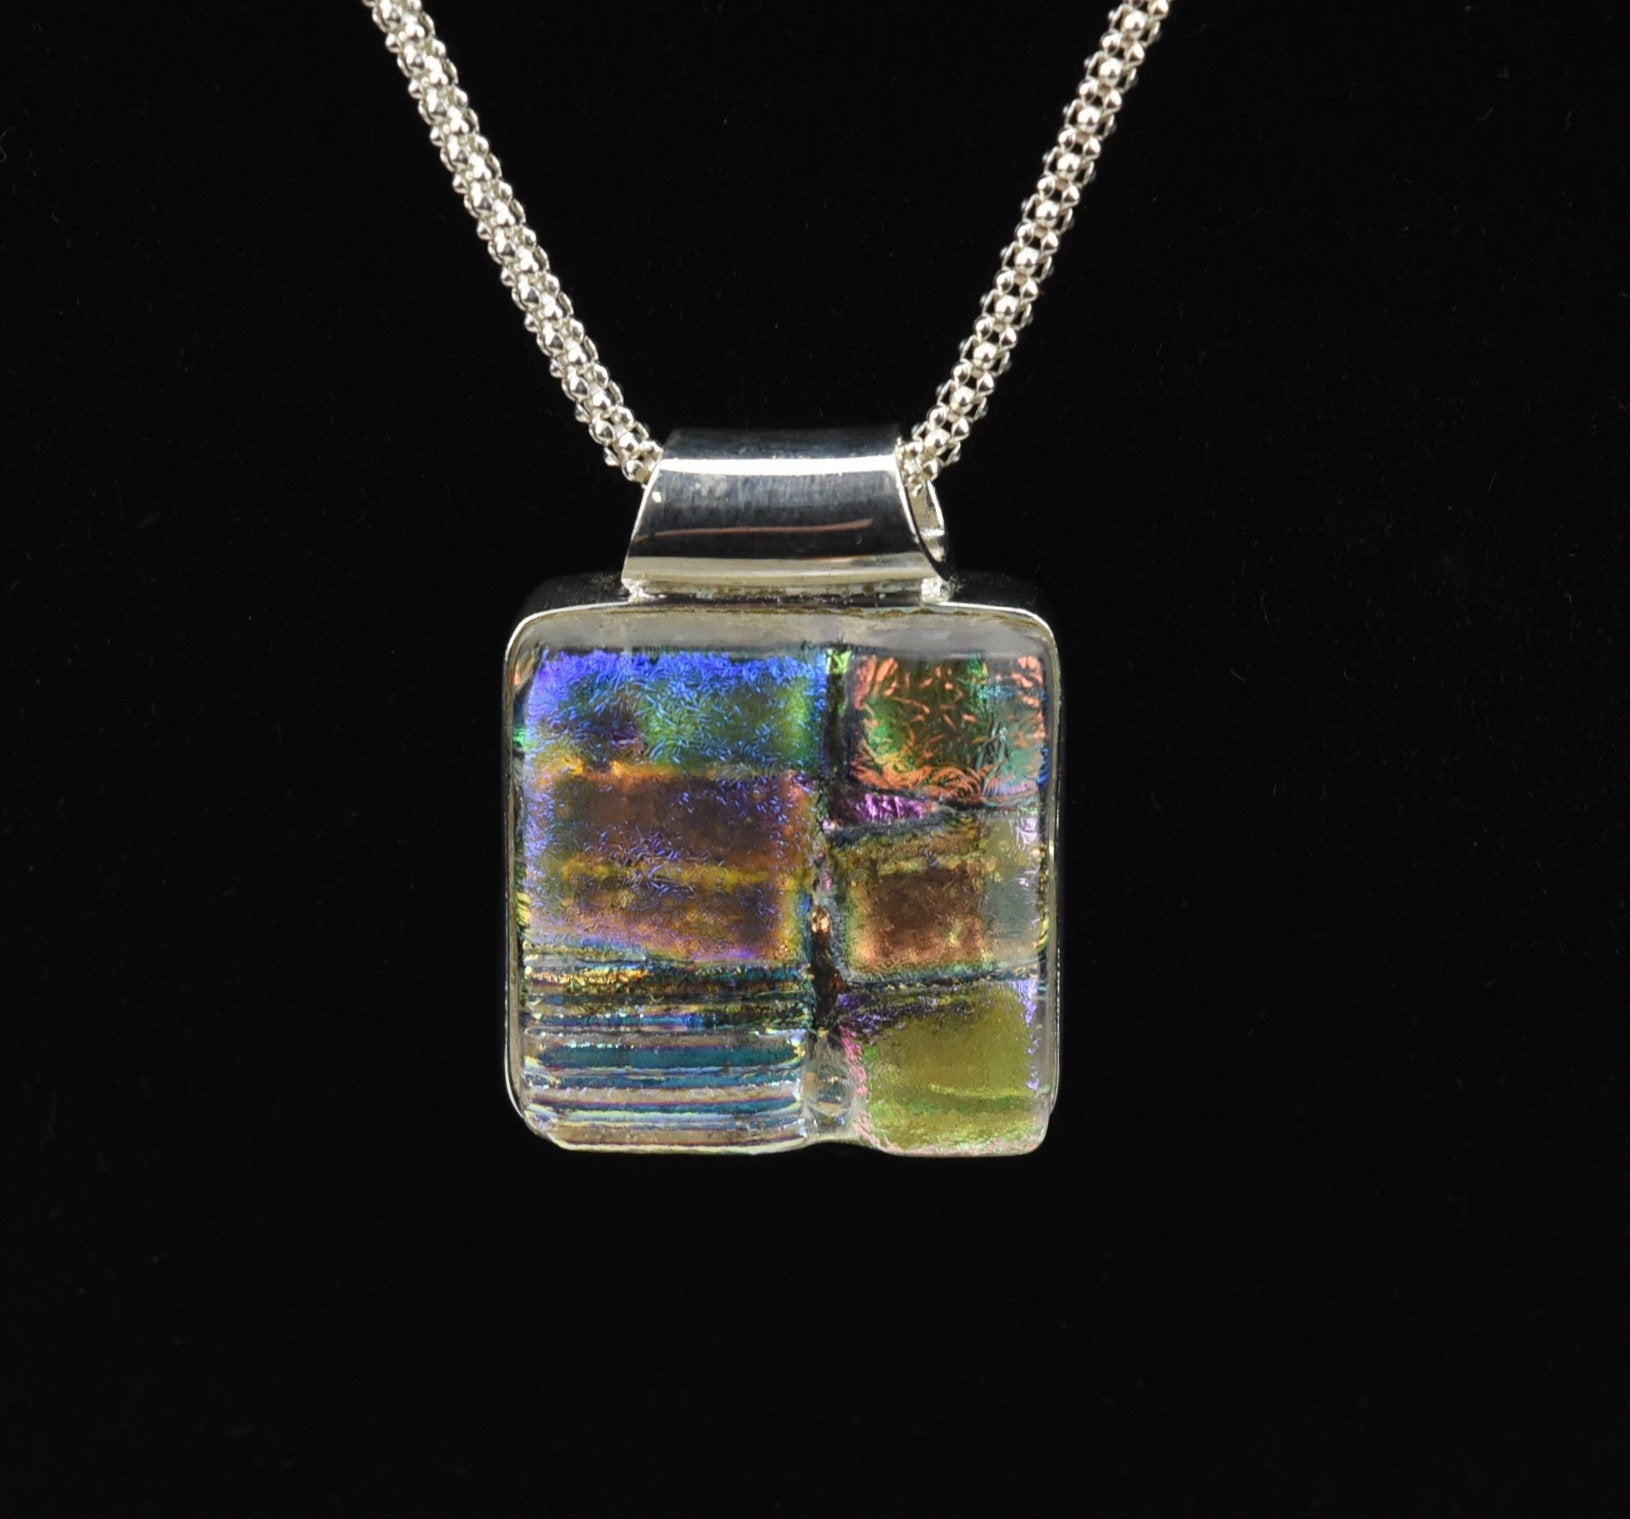 Hi-Ho Silver - Dichroic Glass Sterling Silver Pendant on Sterling Silver Popcorn Link Chain